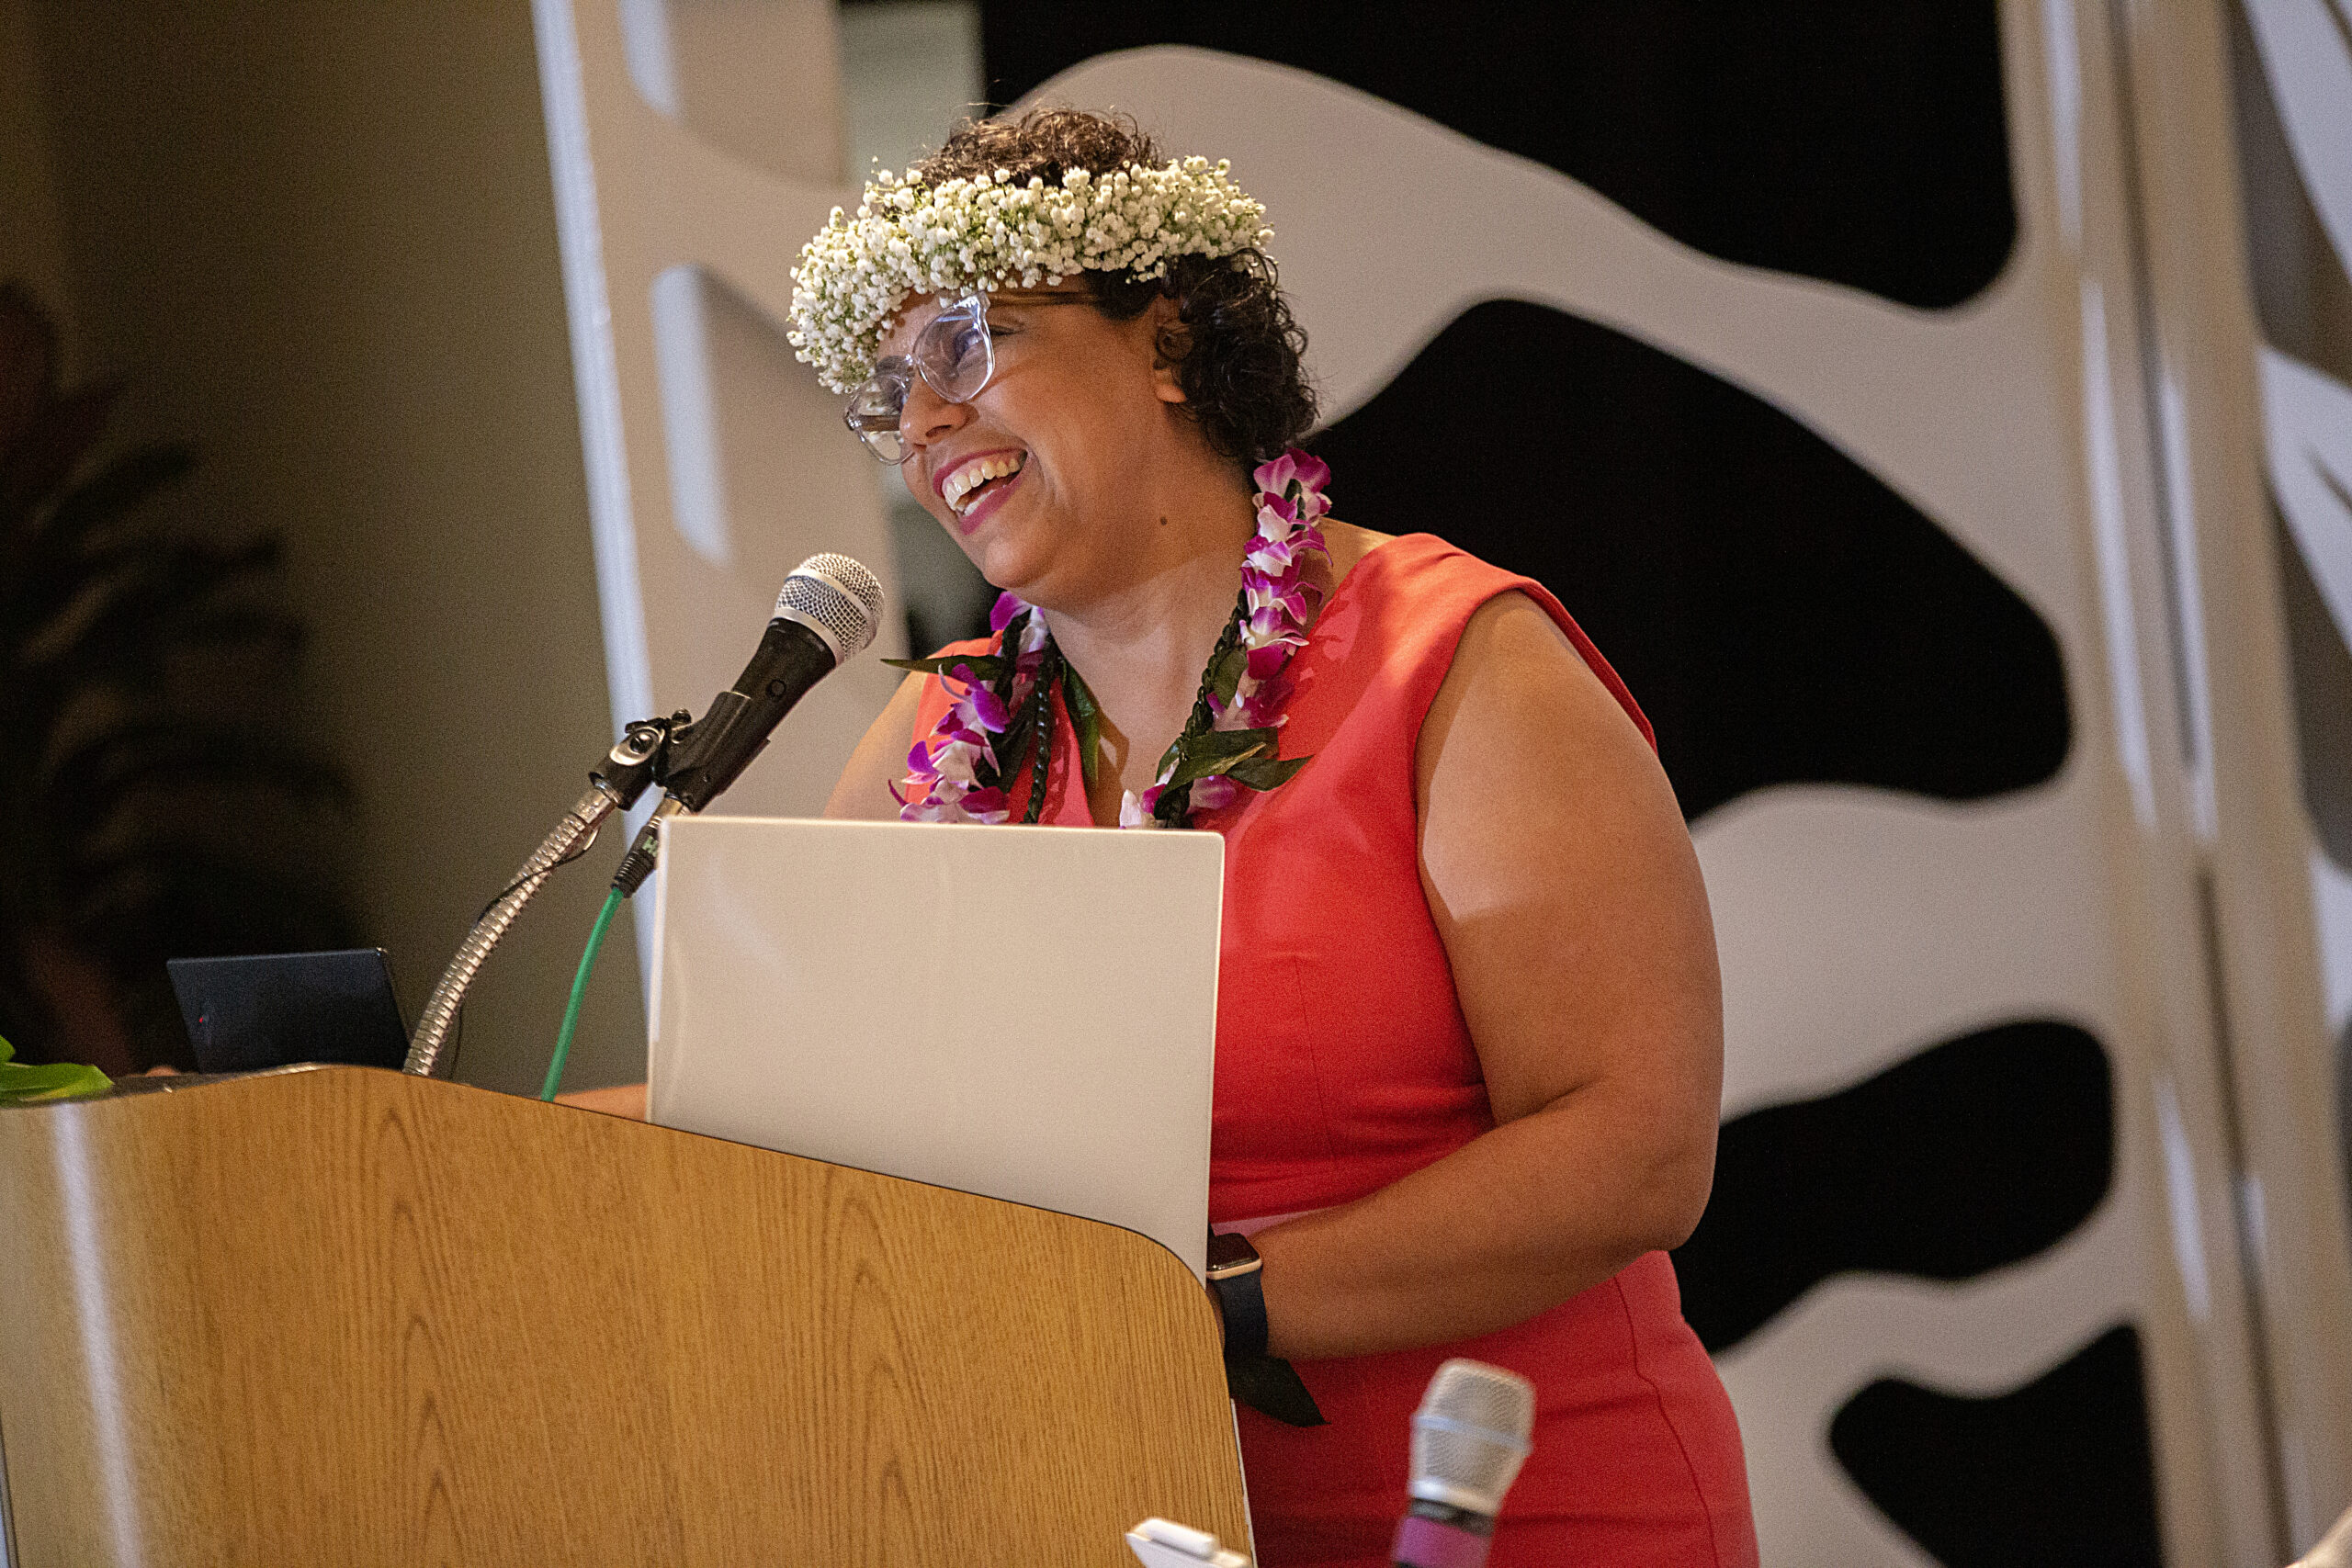 Angelina Mercado, a woman with short, curly dark hair, wears glasses, a crown of baby's breath, and a lei with magenta flowers around her neck. She wears a red dress, a black watch, and smiles from a podium, where she is speaking into a microphone.